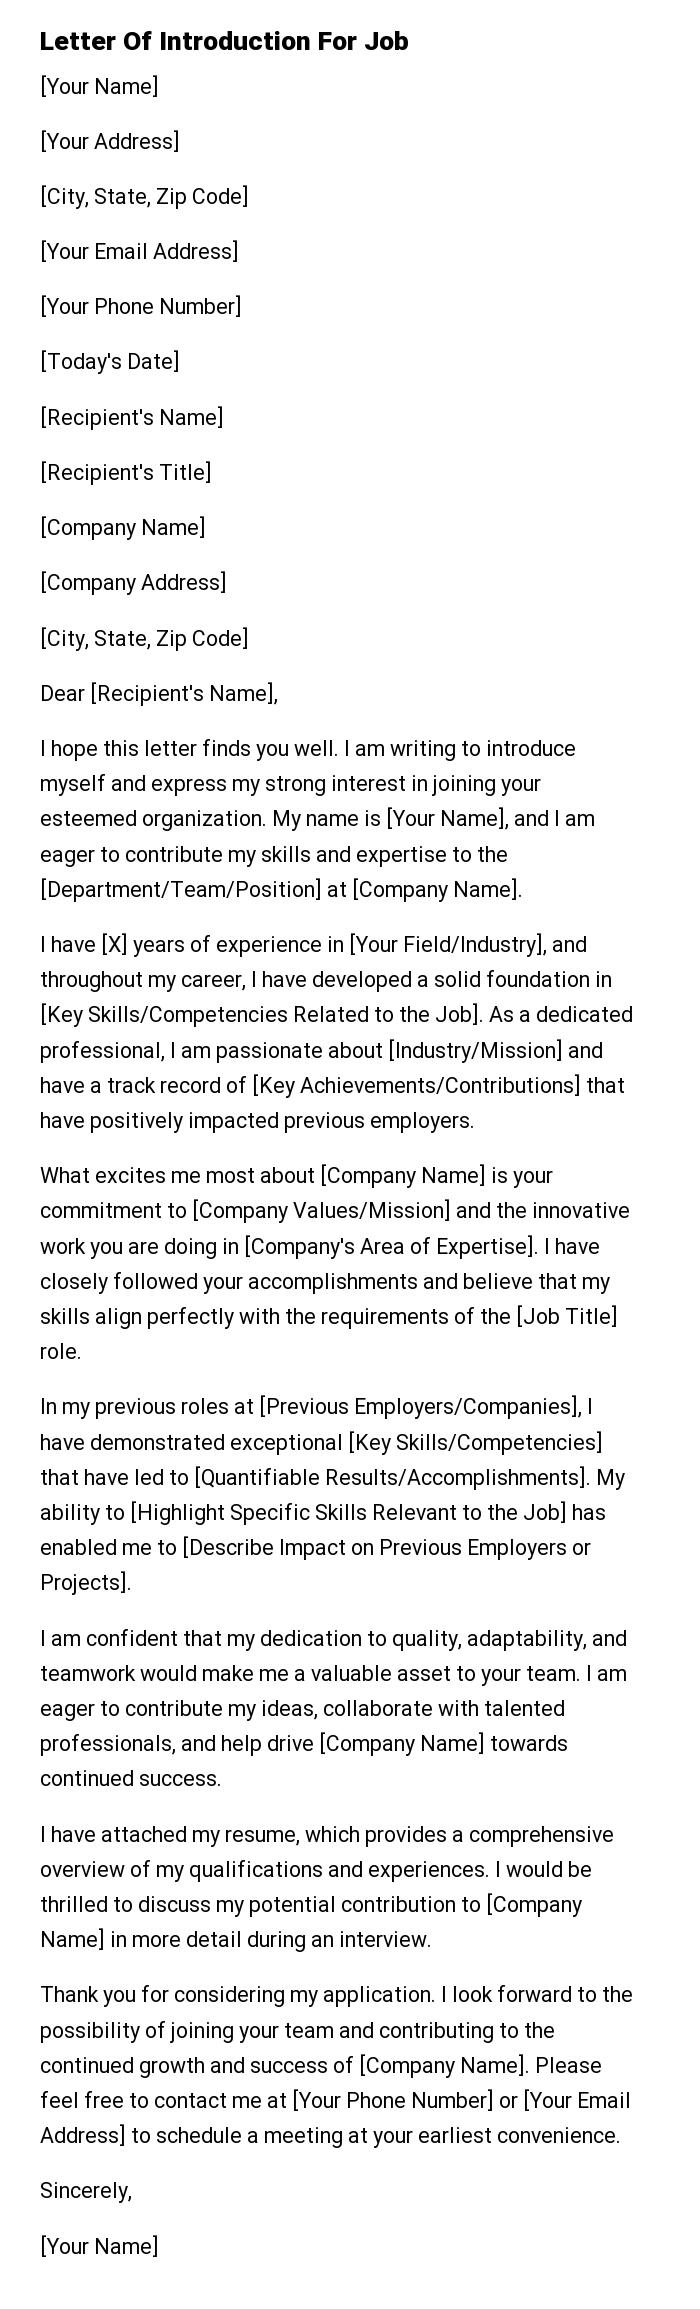 Letter Of Introduction For Job